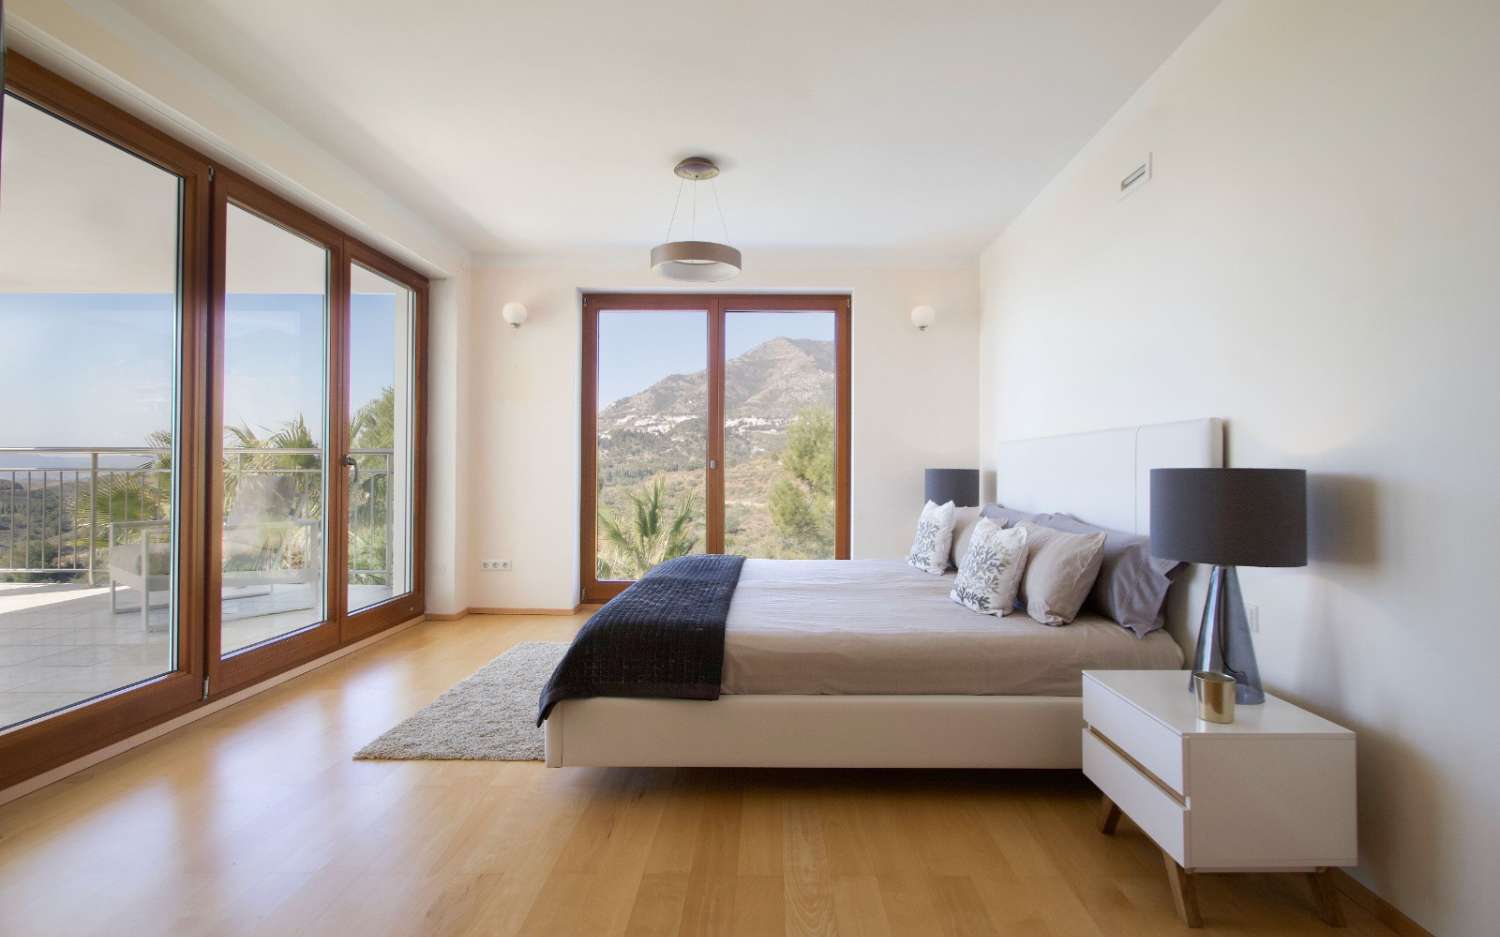 SPECTACULAR Villa for sale in Urbanization of Mijas with panoramic views